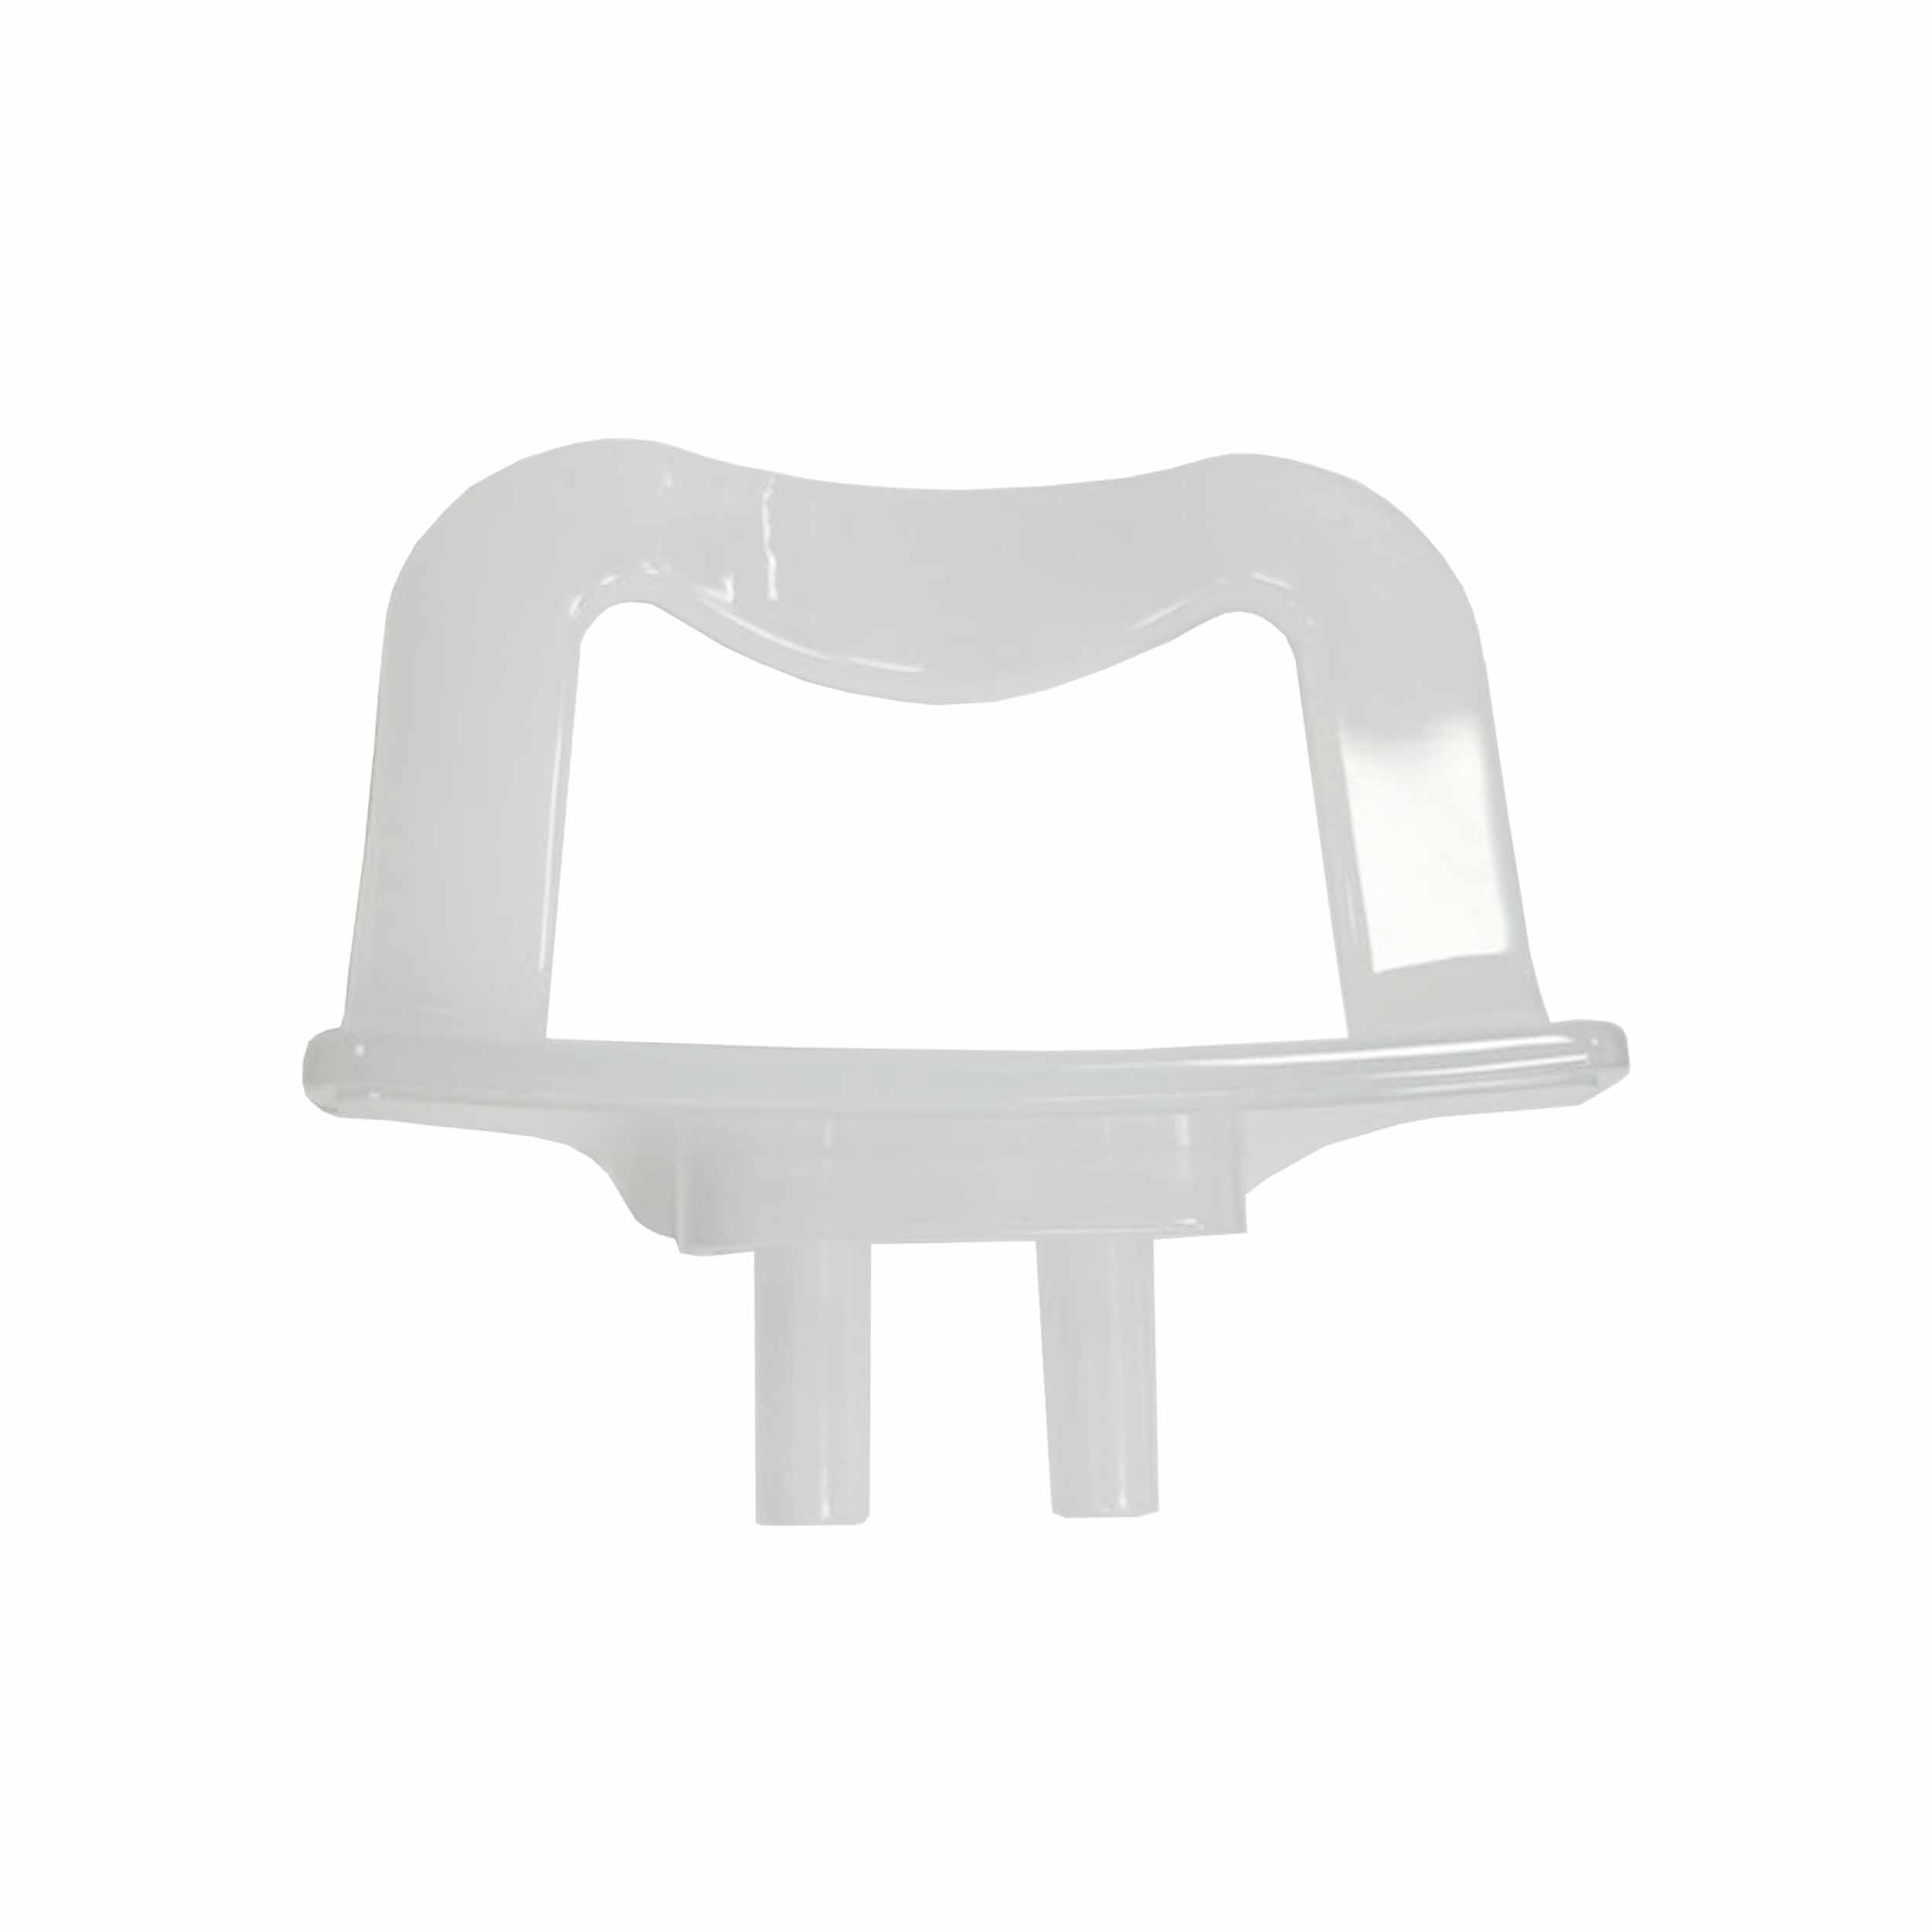 Tmj/Sinus Chinrest (M0400420 Cover-Accessories Sinus Chinrest -A/Pc-Clear Gray/M0028884)